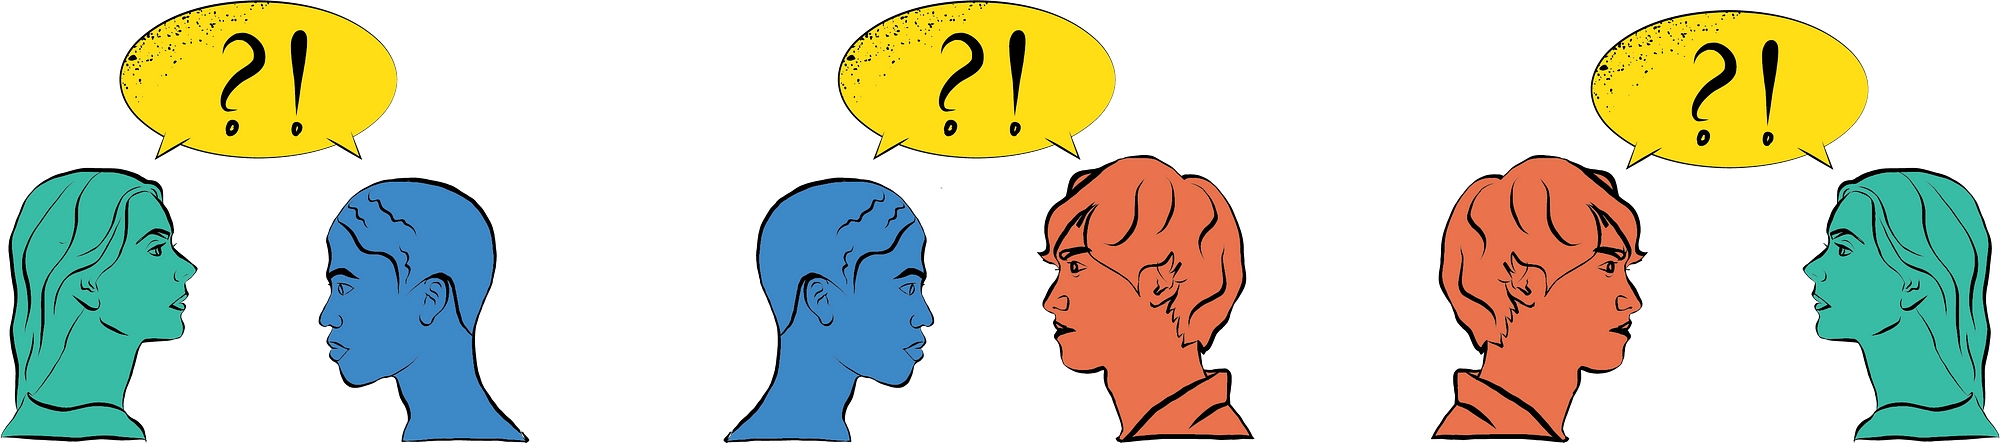 A horizontal row of three sets of two heads facing each other with a word bubble over their heads containing a question mark on the left and an exclamation mark on the right. Each set of heads is a different grouping of the three total people shown. Hand-drawn graphic